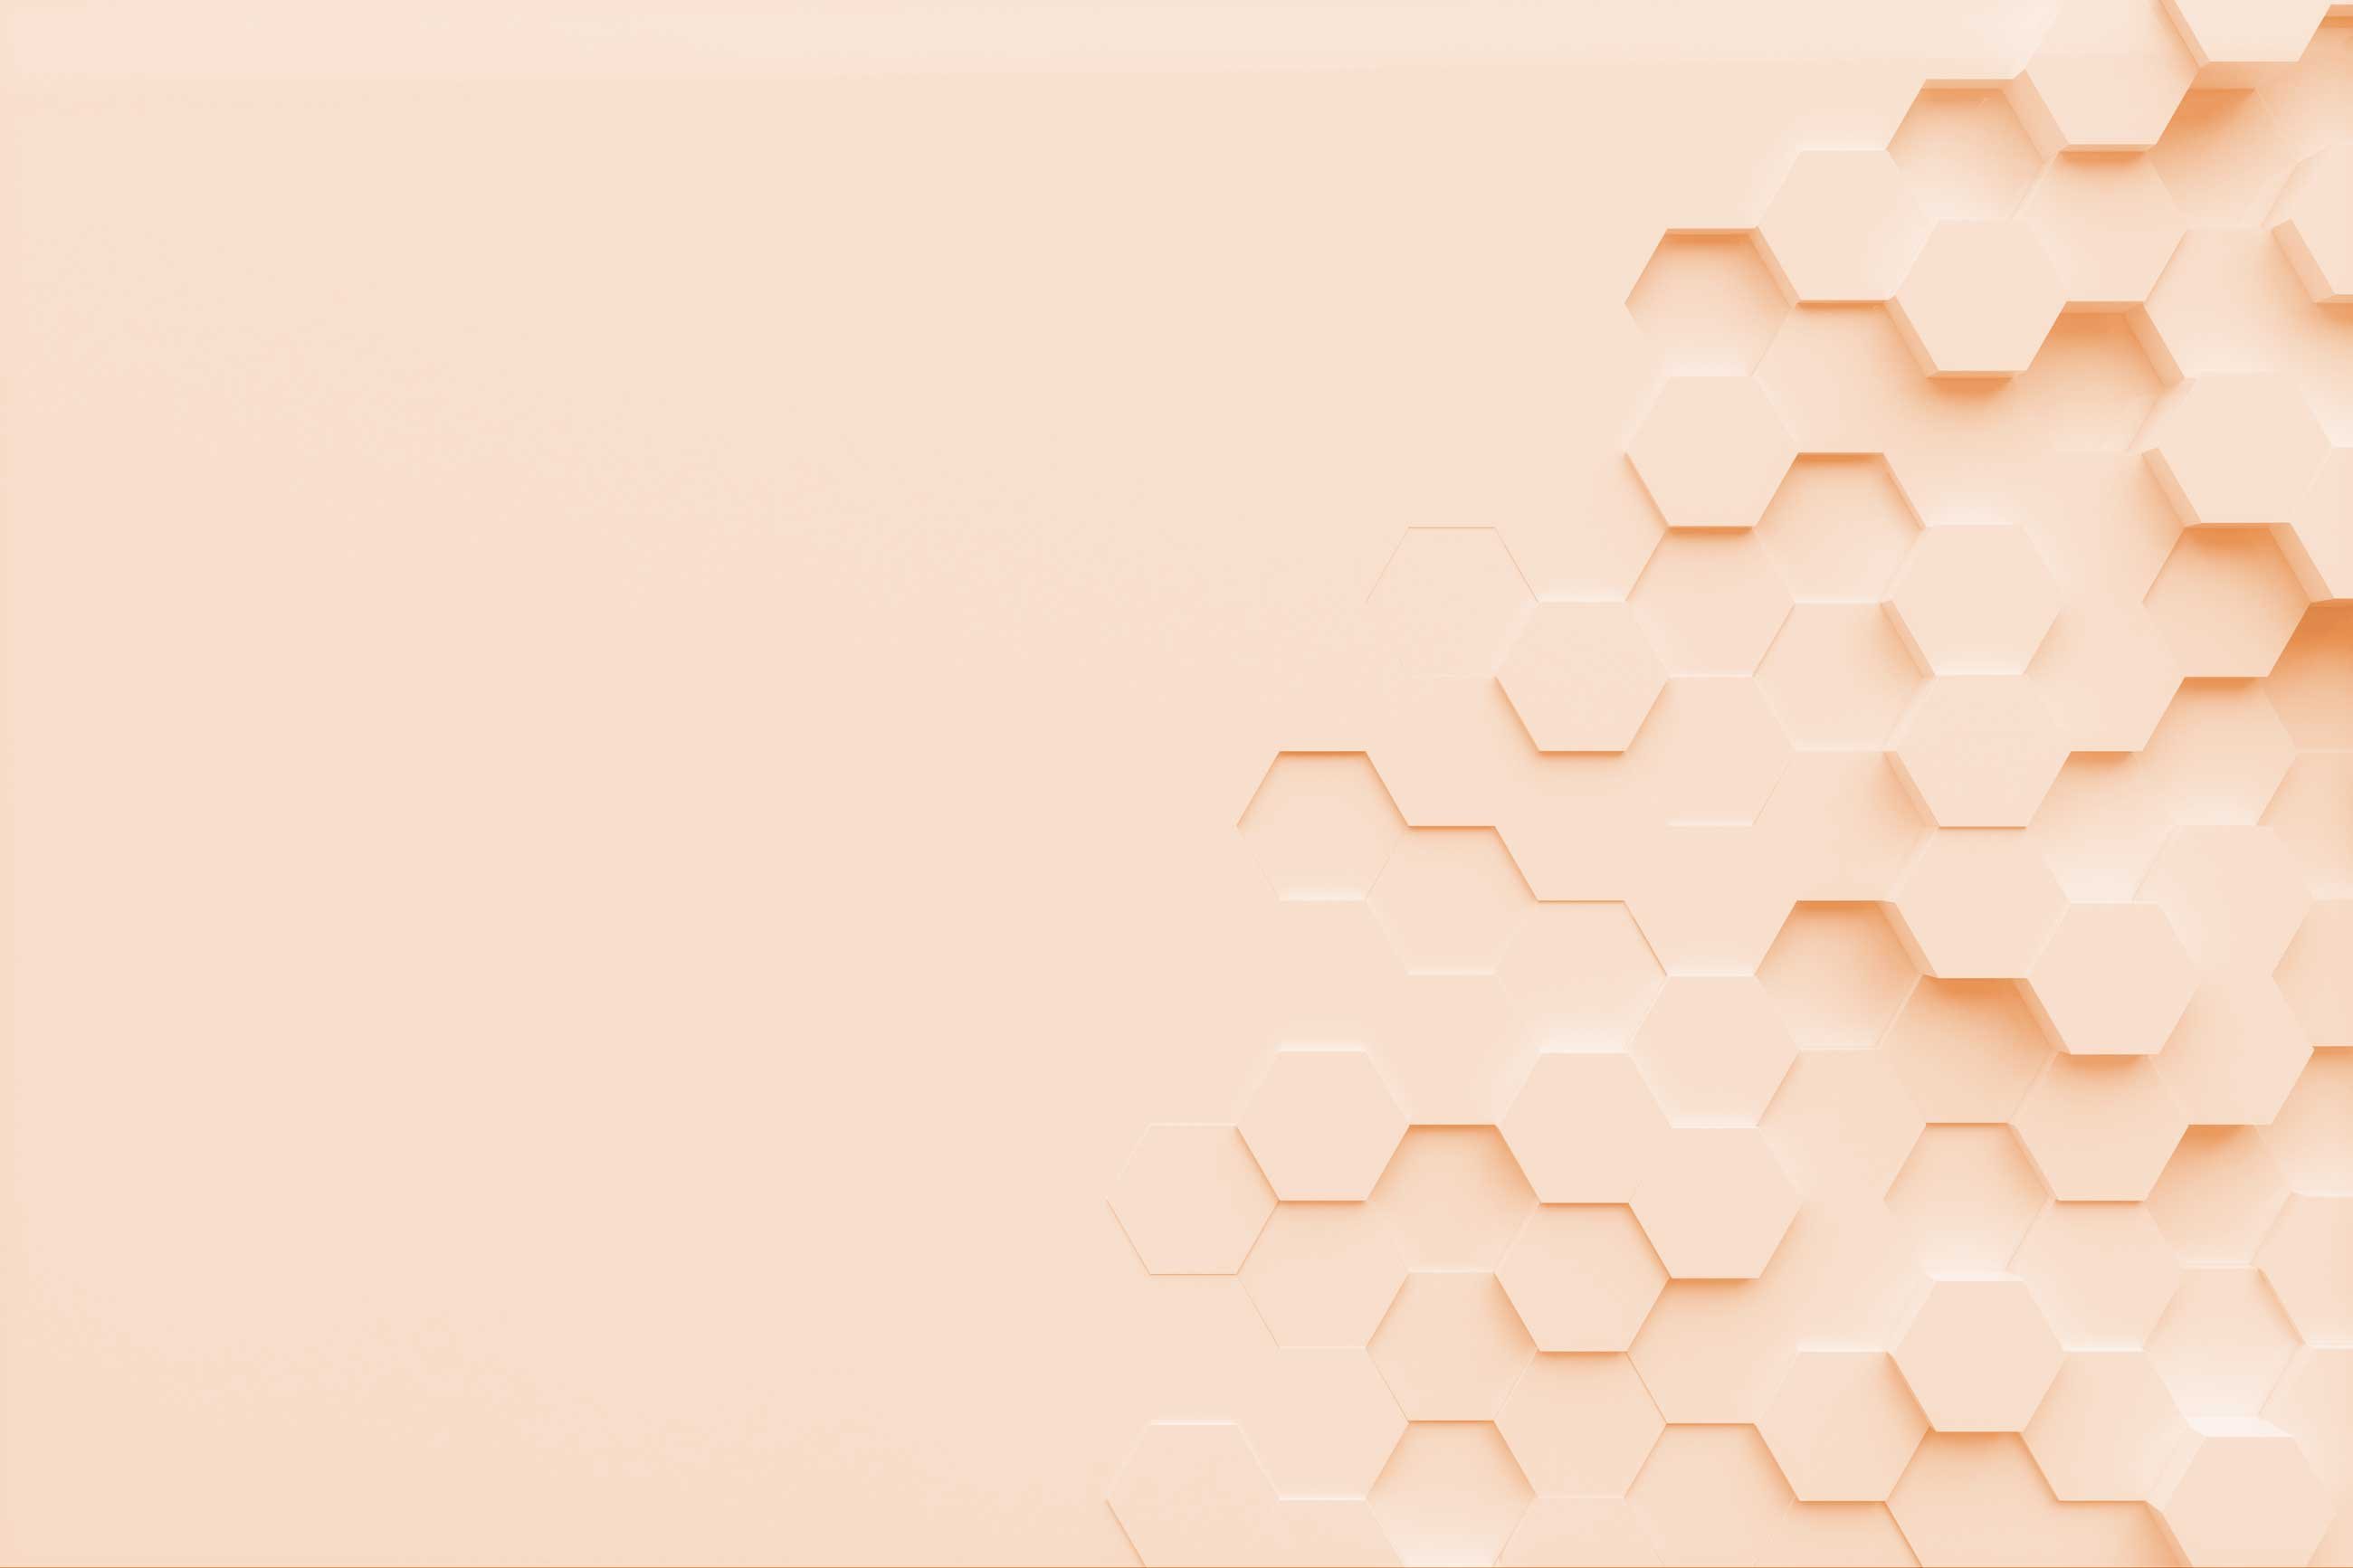 An abstract image of hexagons in a peach color. - Minimalist, beige, minimalist beige